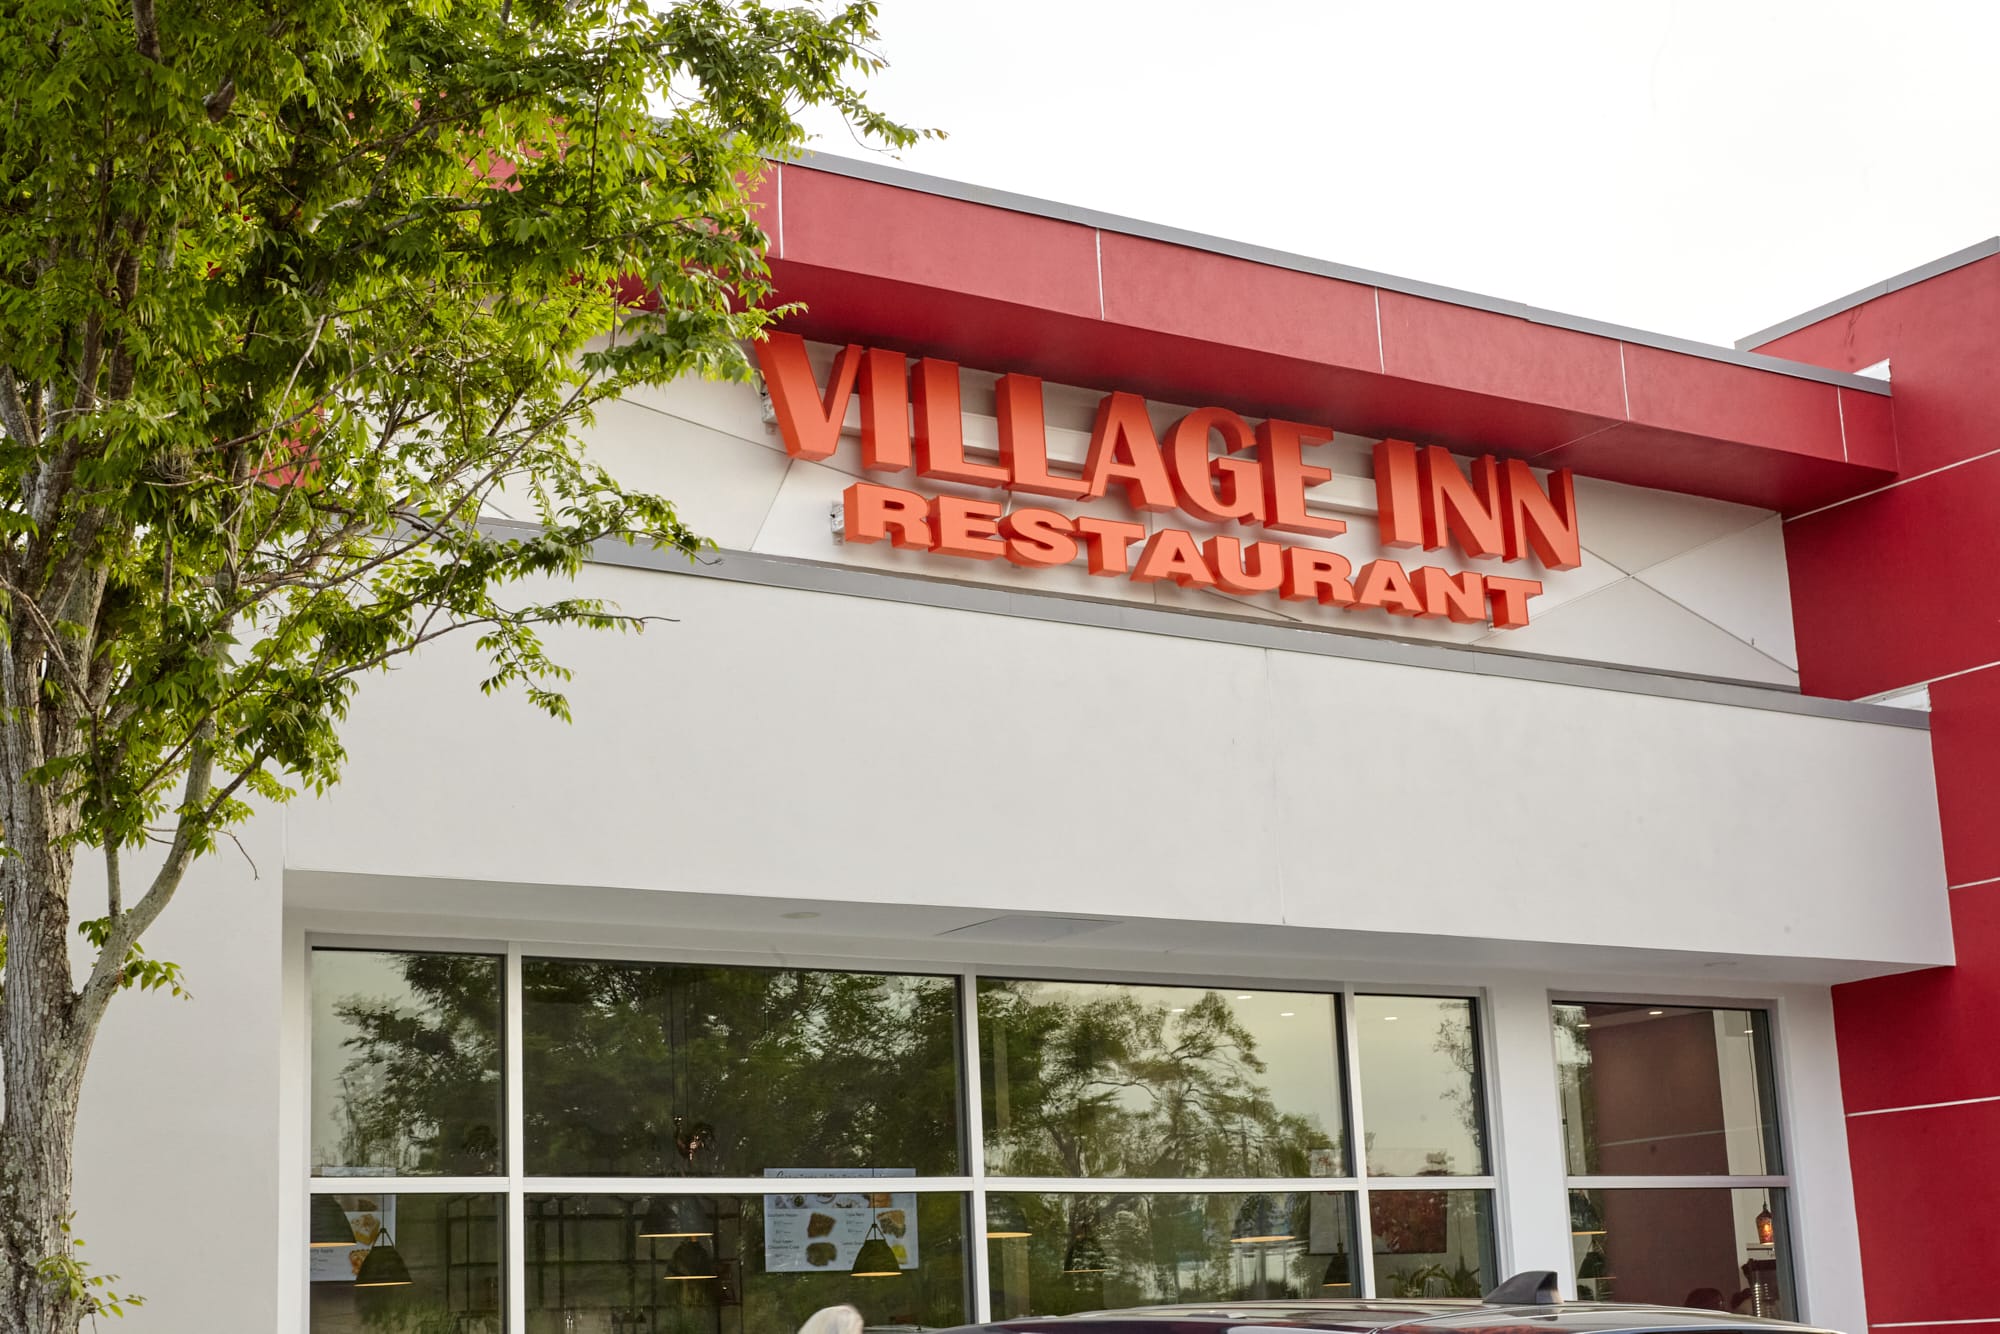 Village Inn Moving to New and Improved Brandon Location